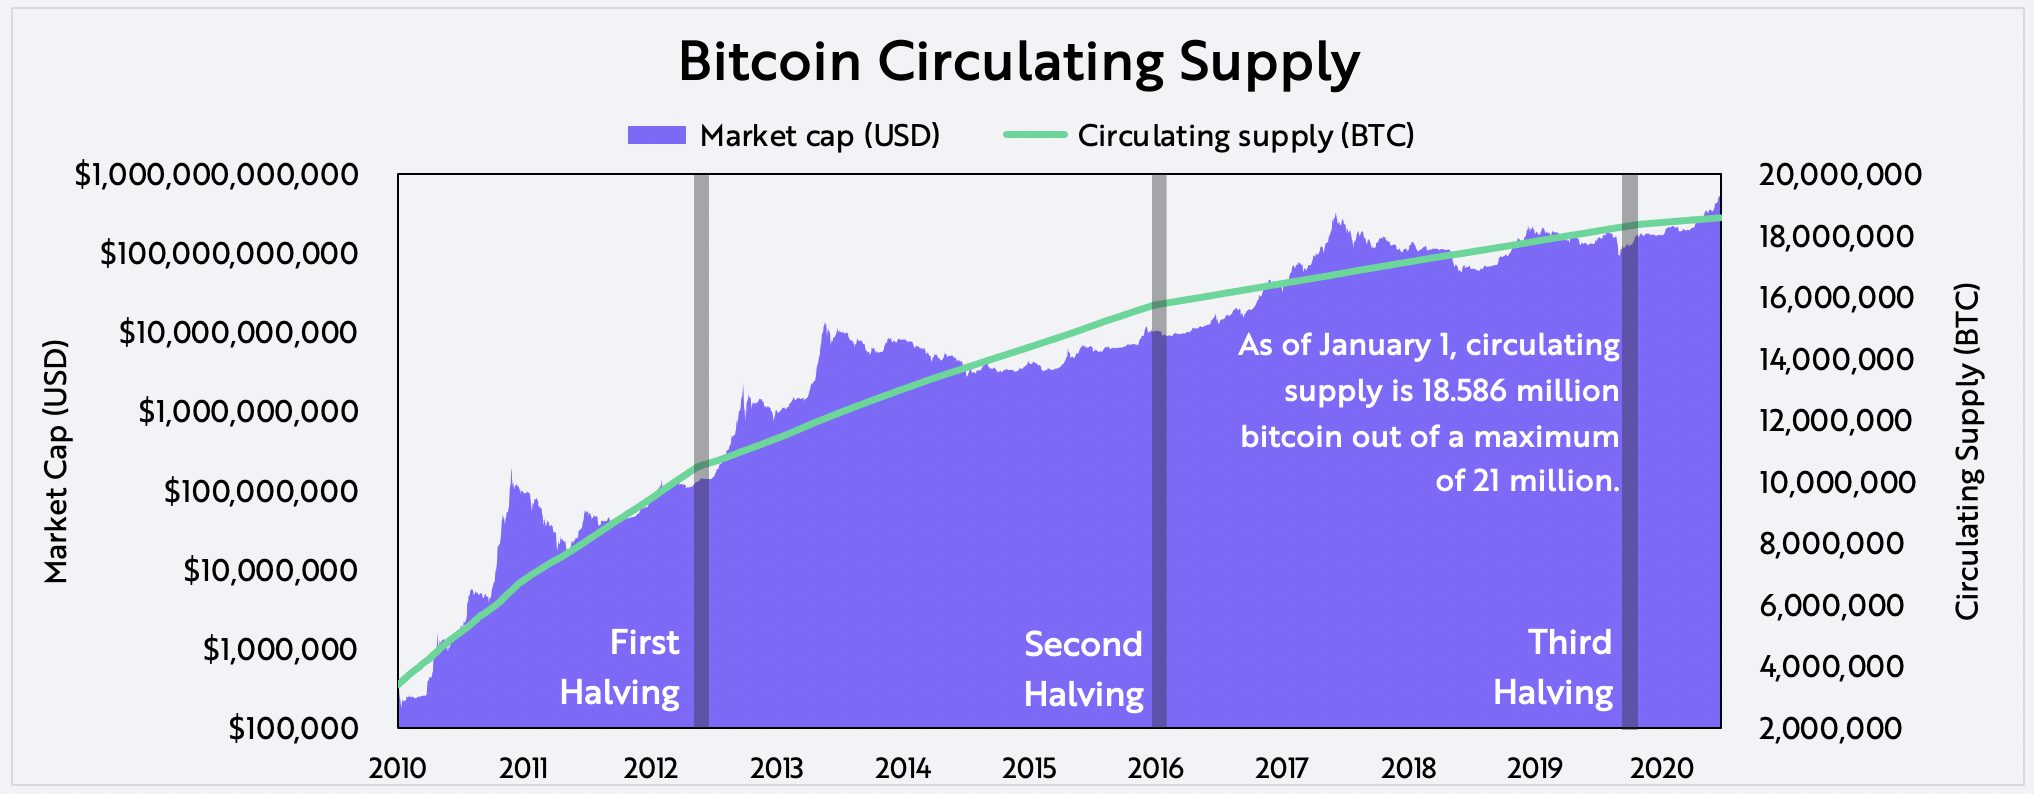 Evaluating Bitcoin_Circulating Supply on-chain